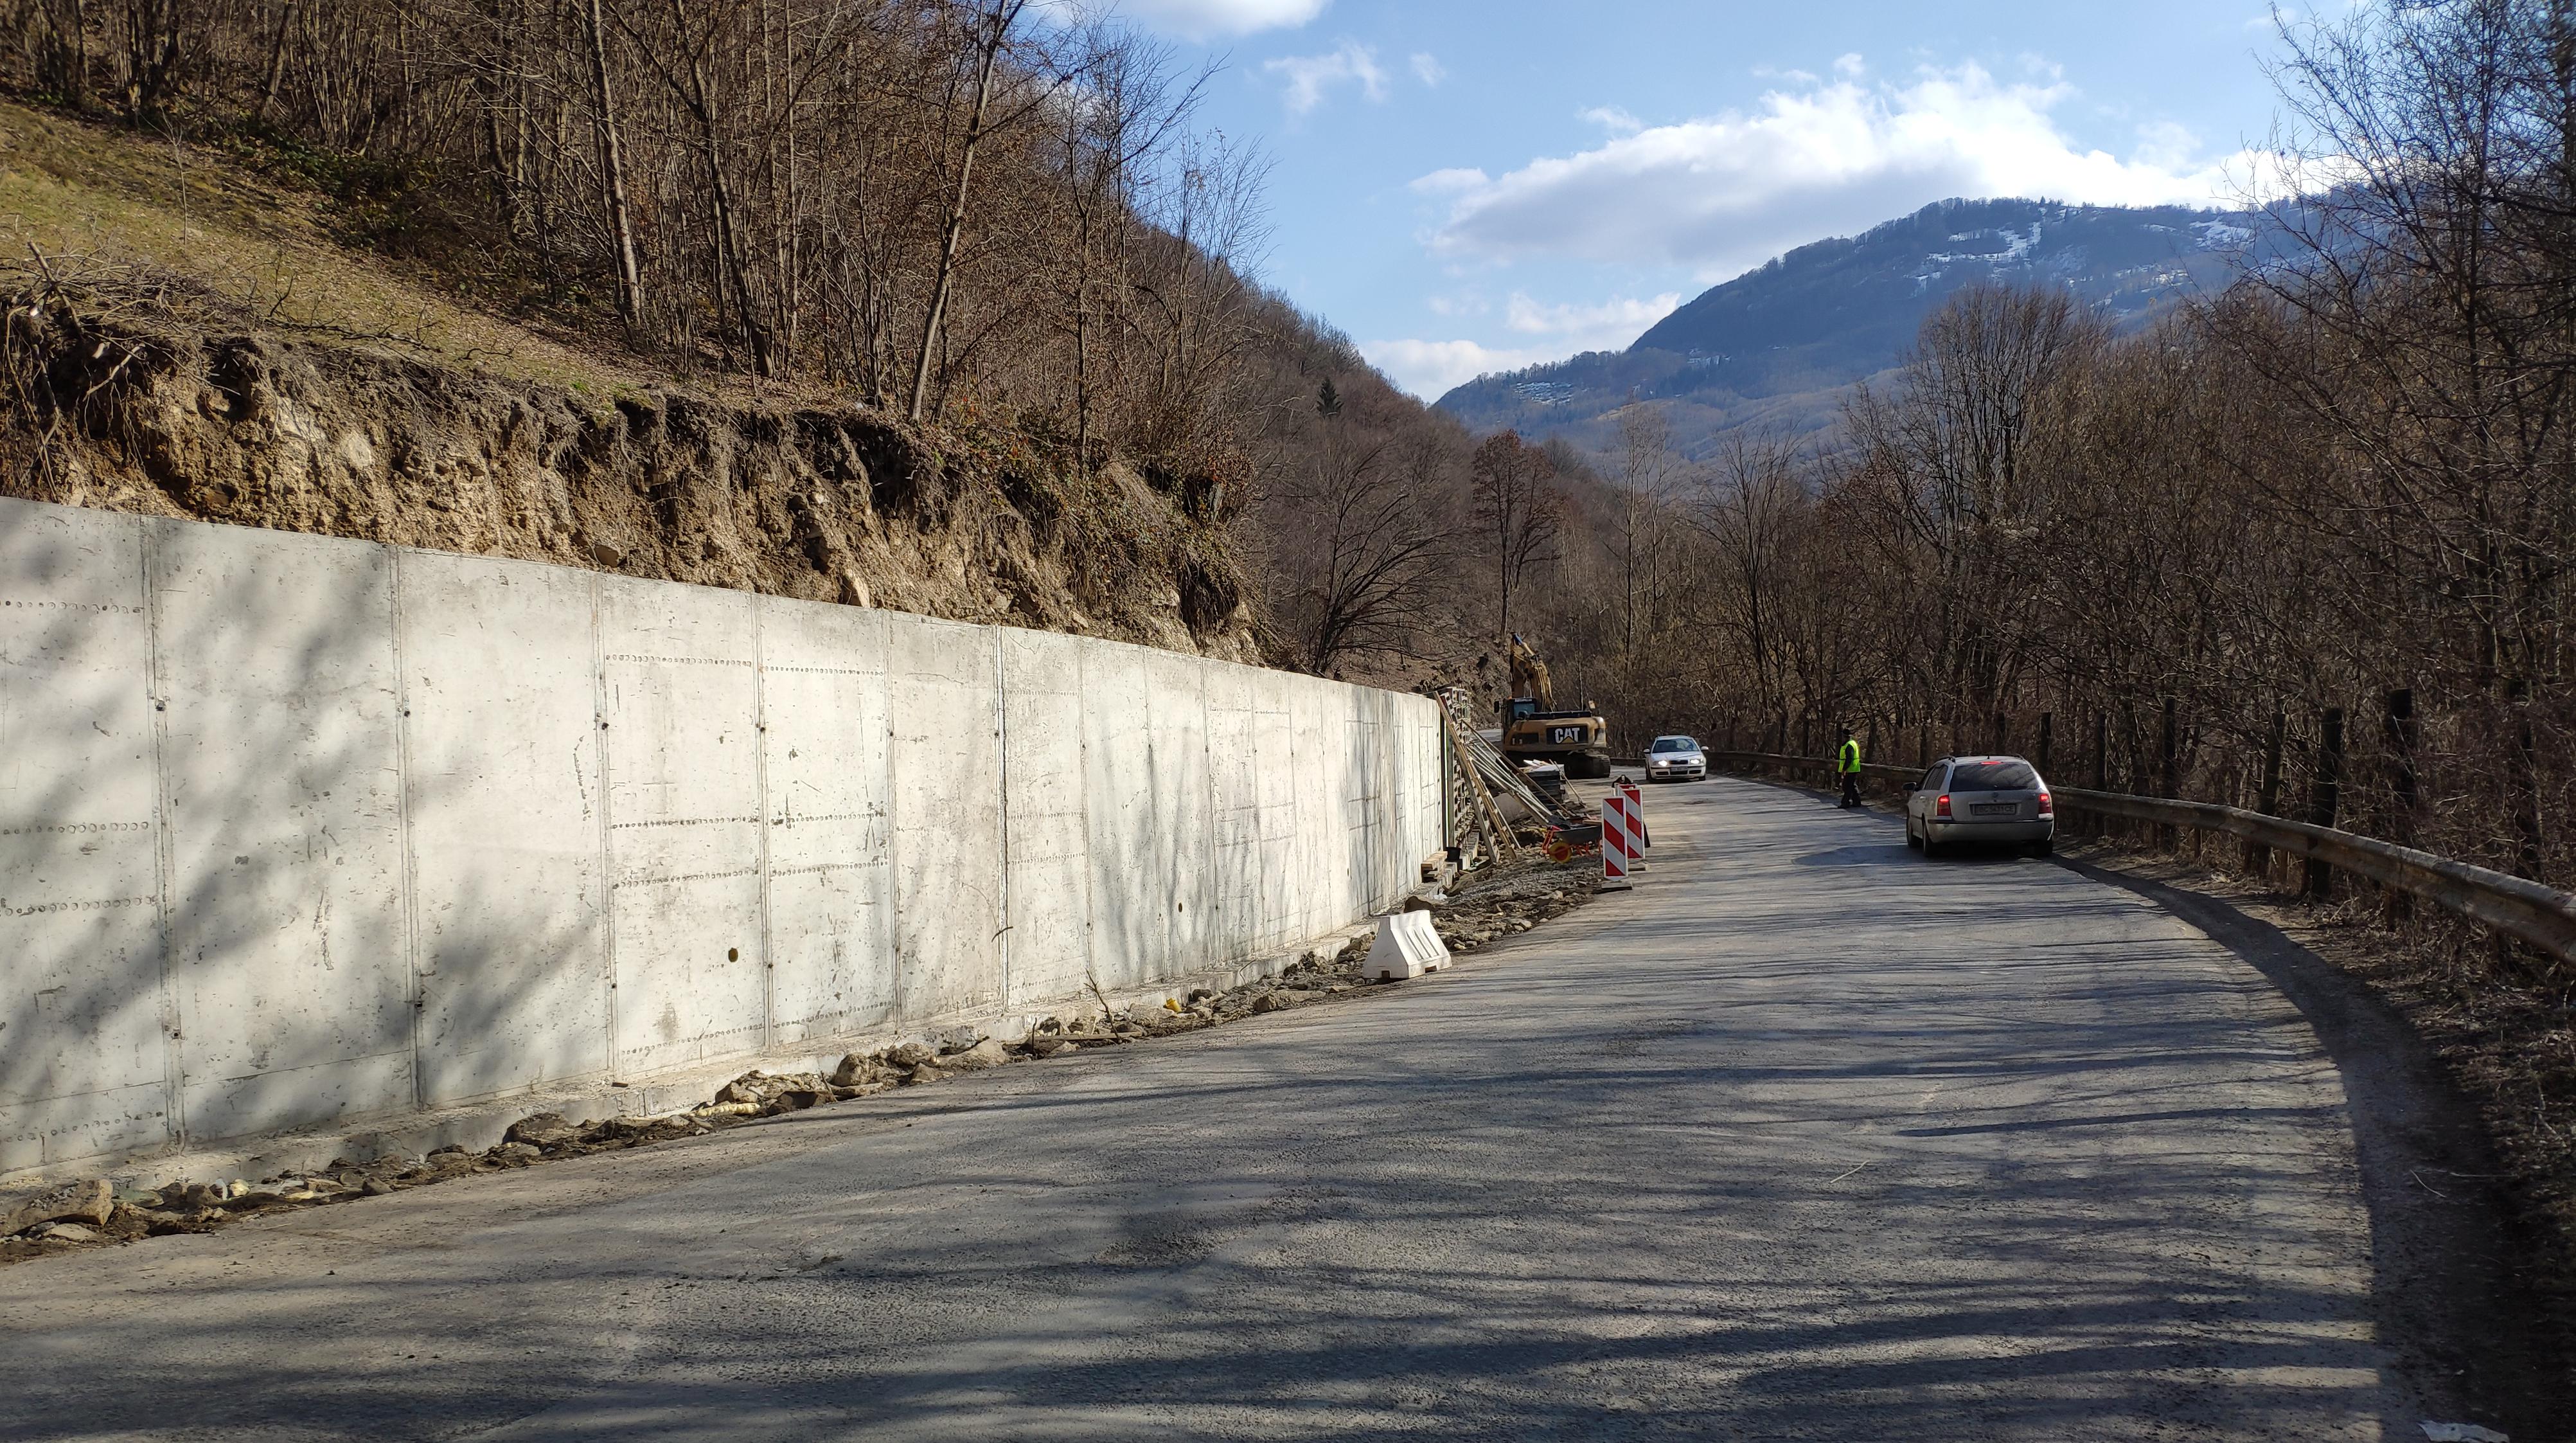 "PBS" to construct a number of retaining walls along the road H-09 Mukachevo - Lviv